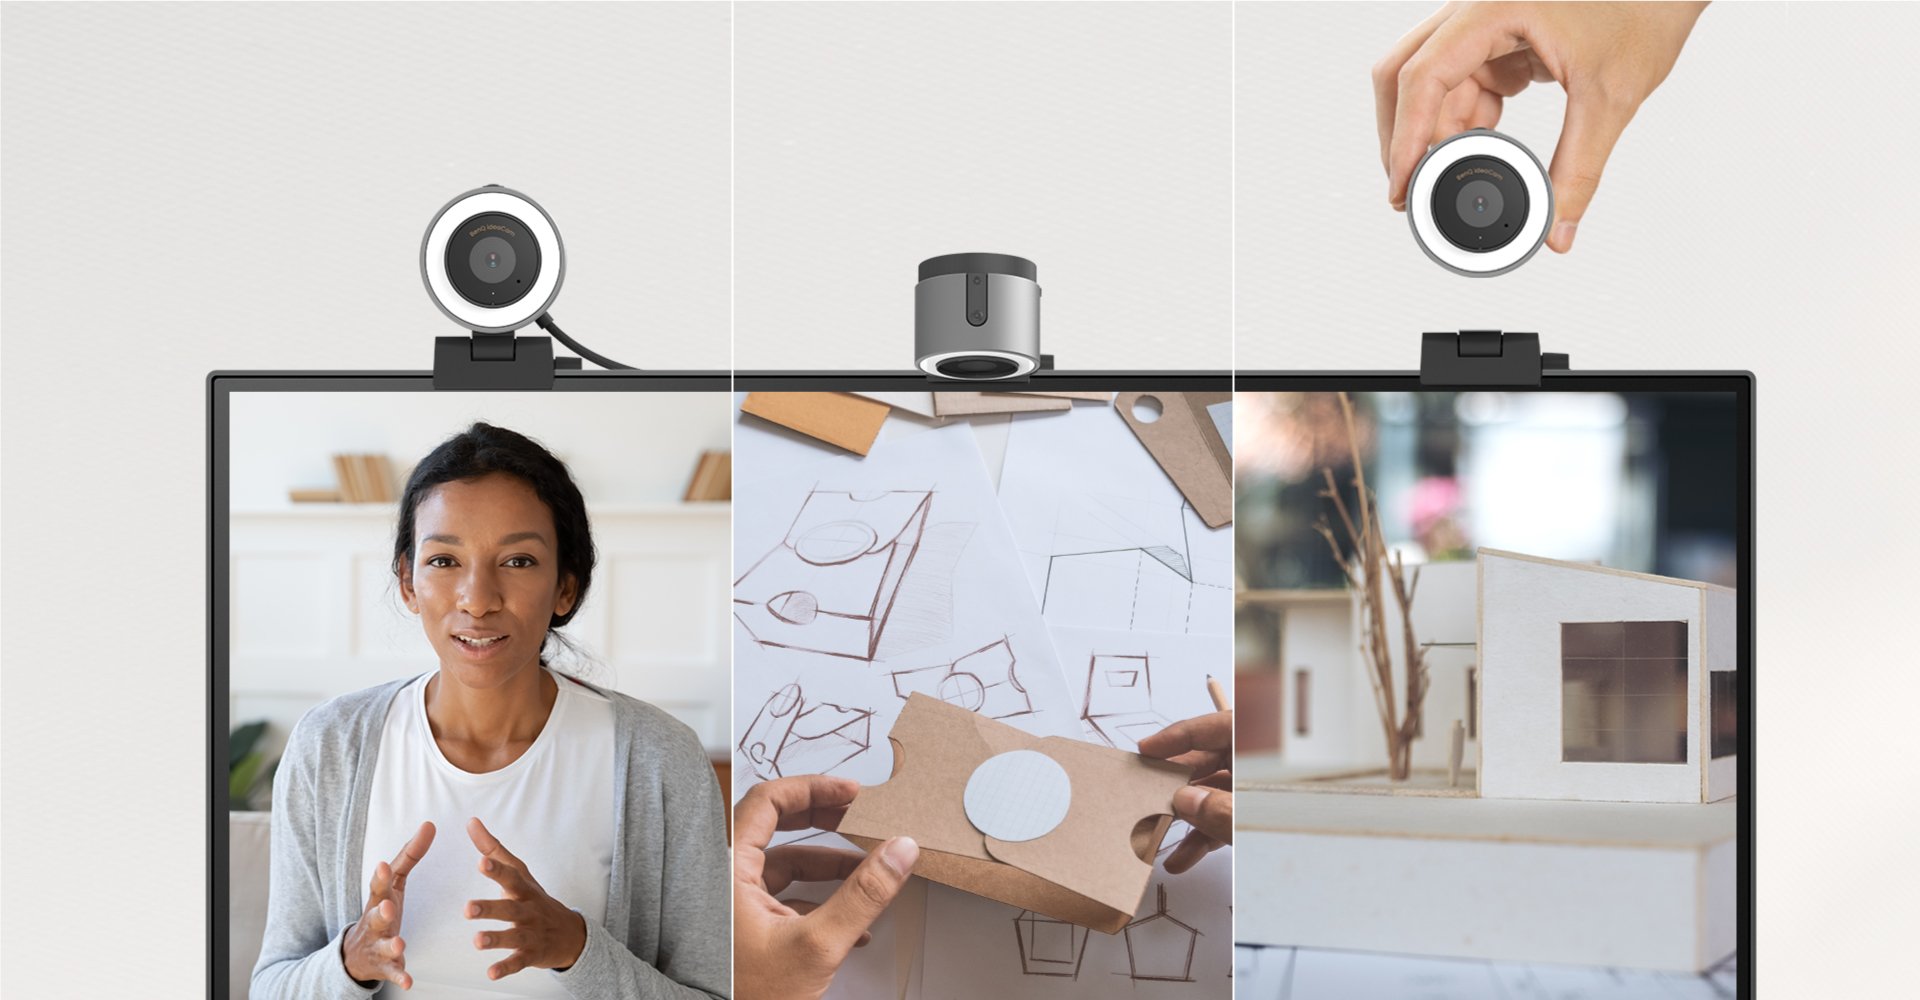 BenQ ideaCam is a versatile webcam that offers portrait, desk view, and handheld modes, seamlessly switching from webcam to document camera in just a second. It simplifies presenting materials on your desktop, making it easy and convenient.